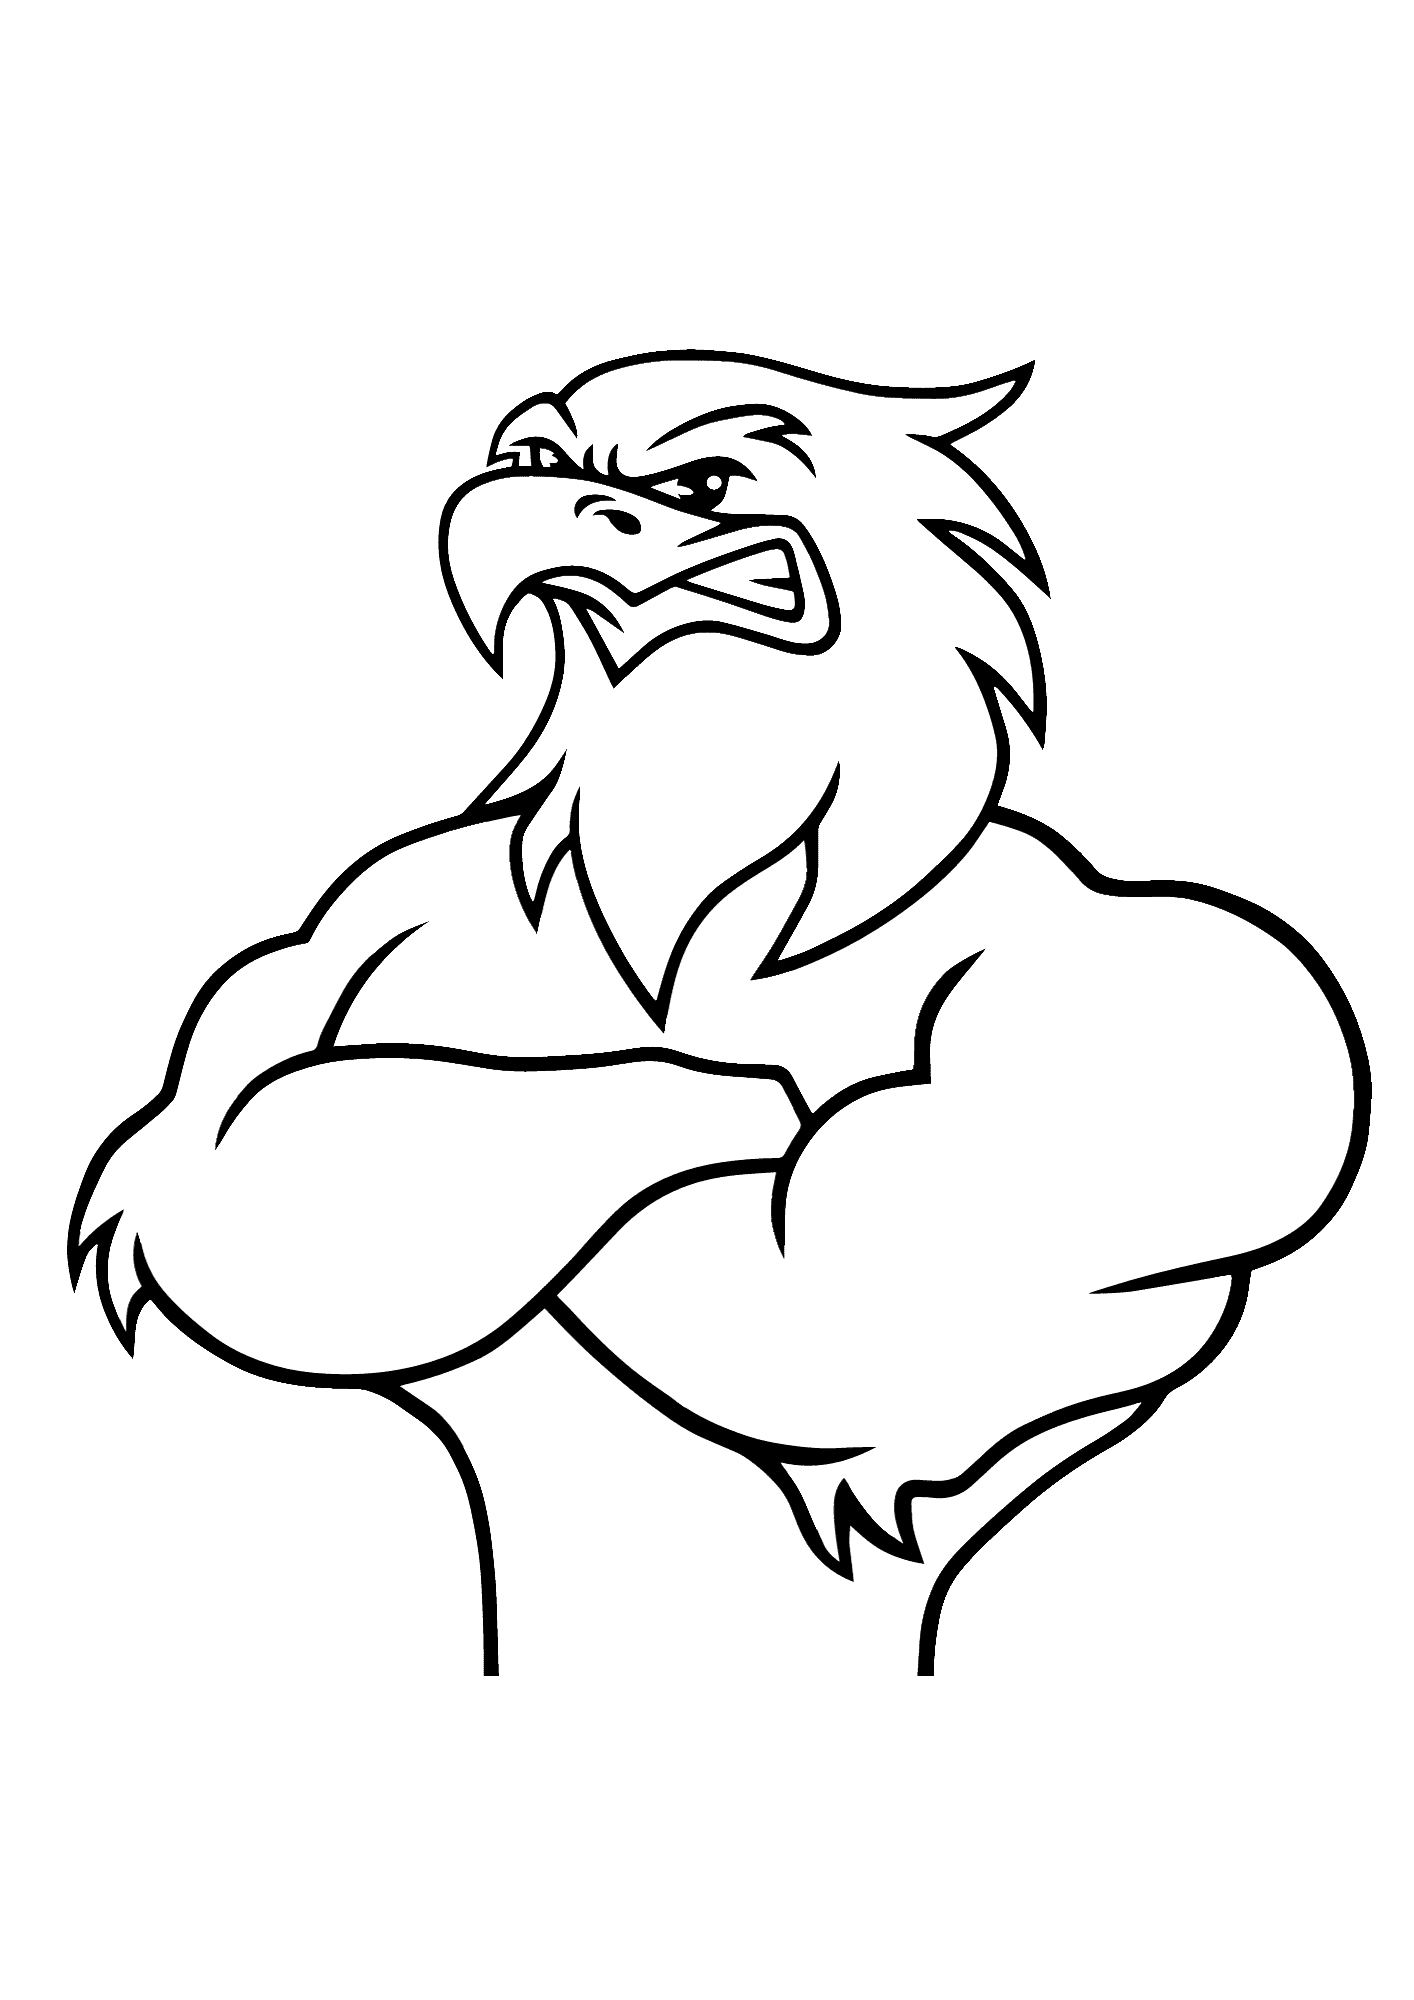 Printable Eagle Crazy Coloring Pages